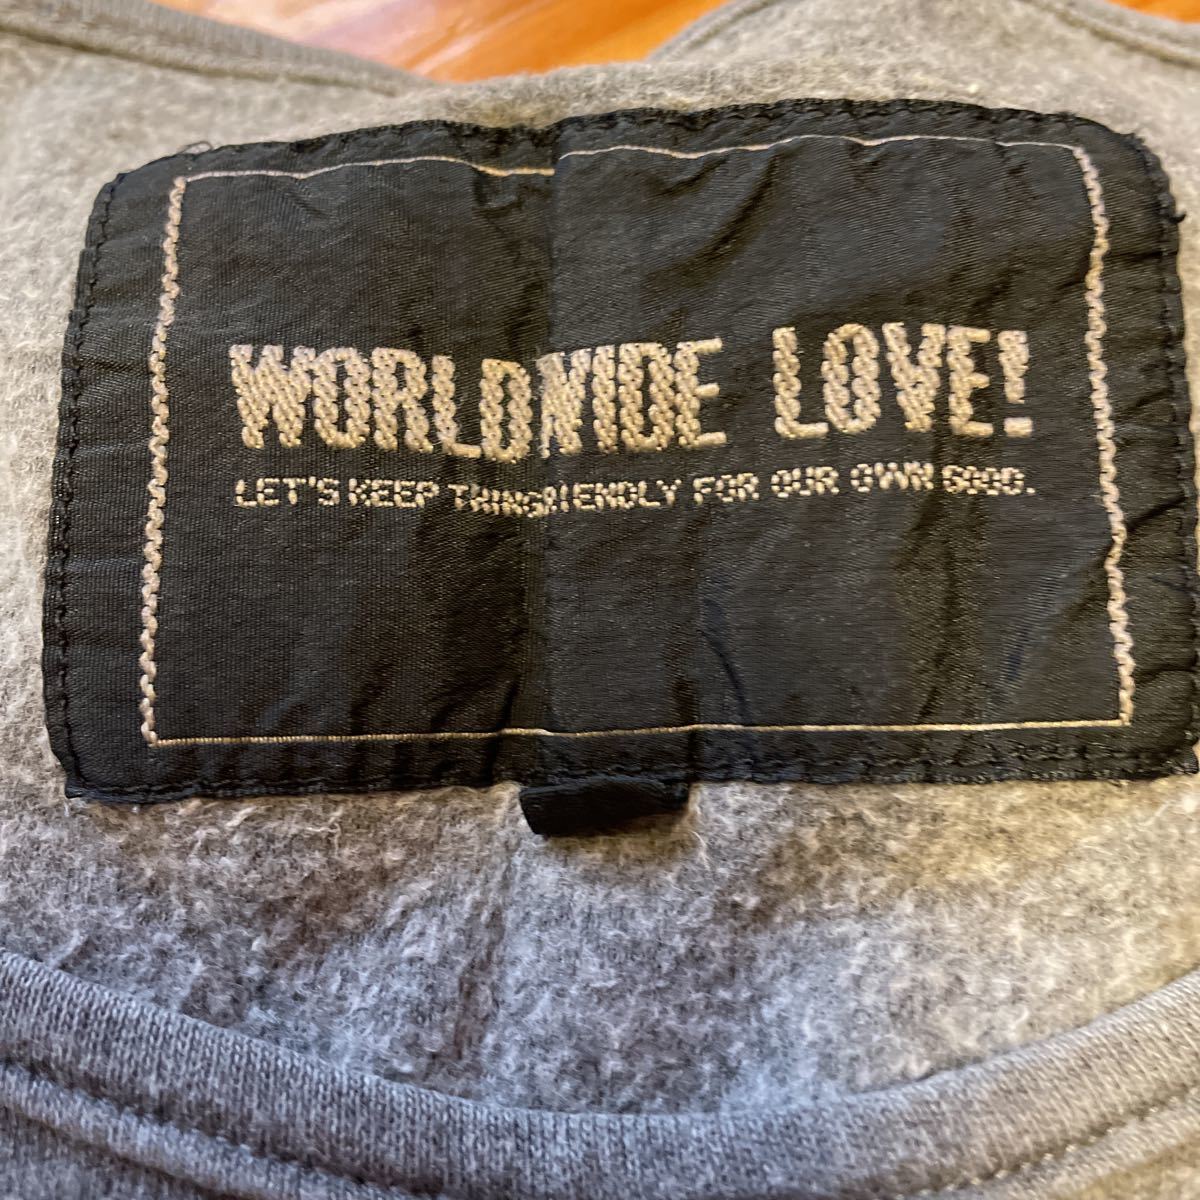  World Wide Love tank top size 1 lady's 